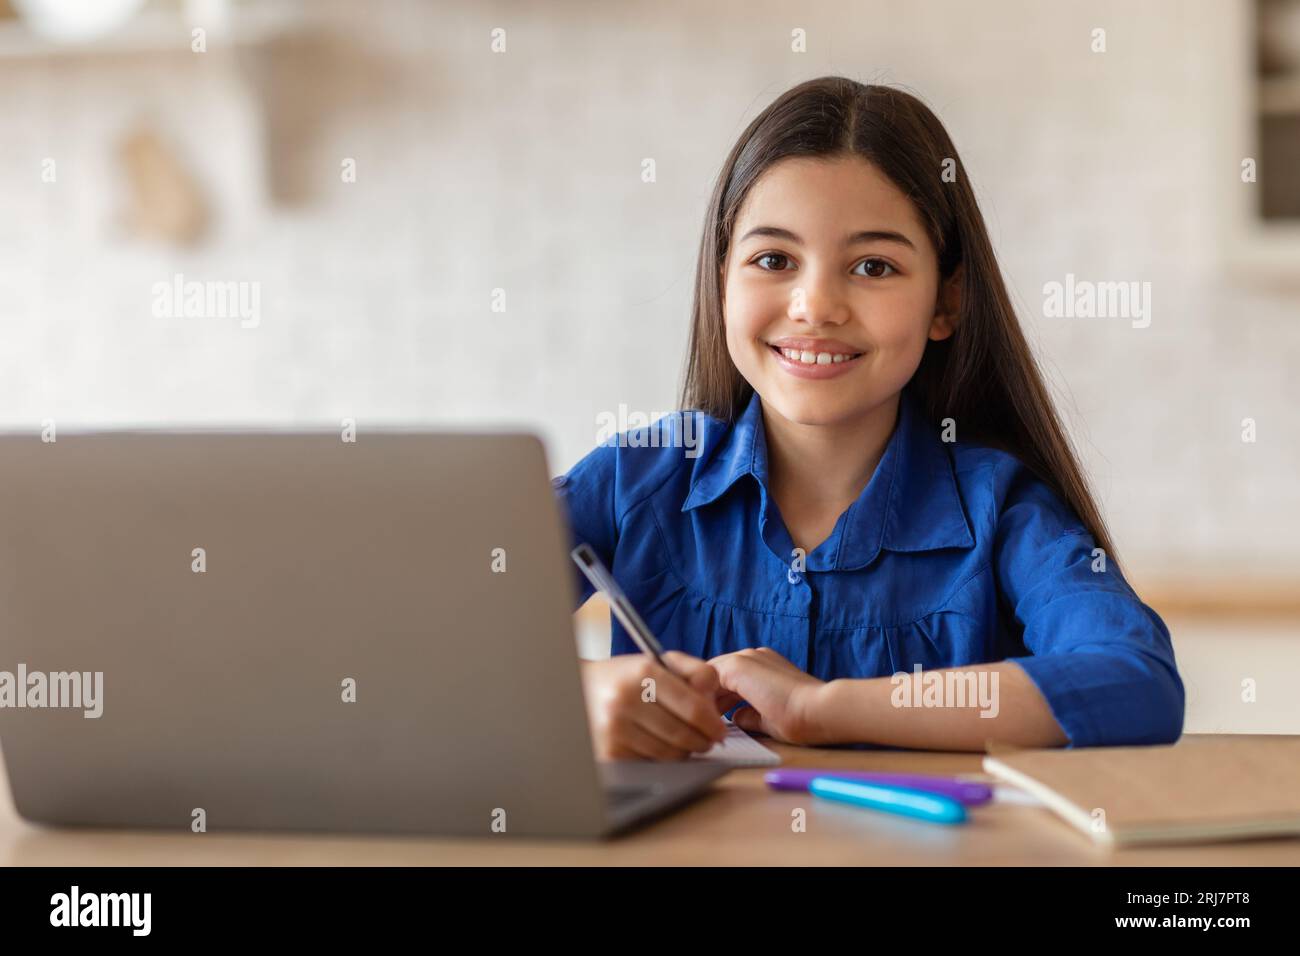 Teenage school girl posing at desk with laptop writing indoors Stock Photo